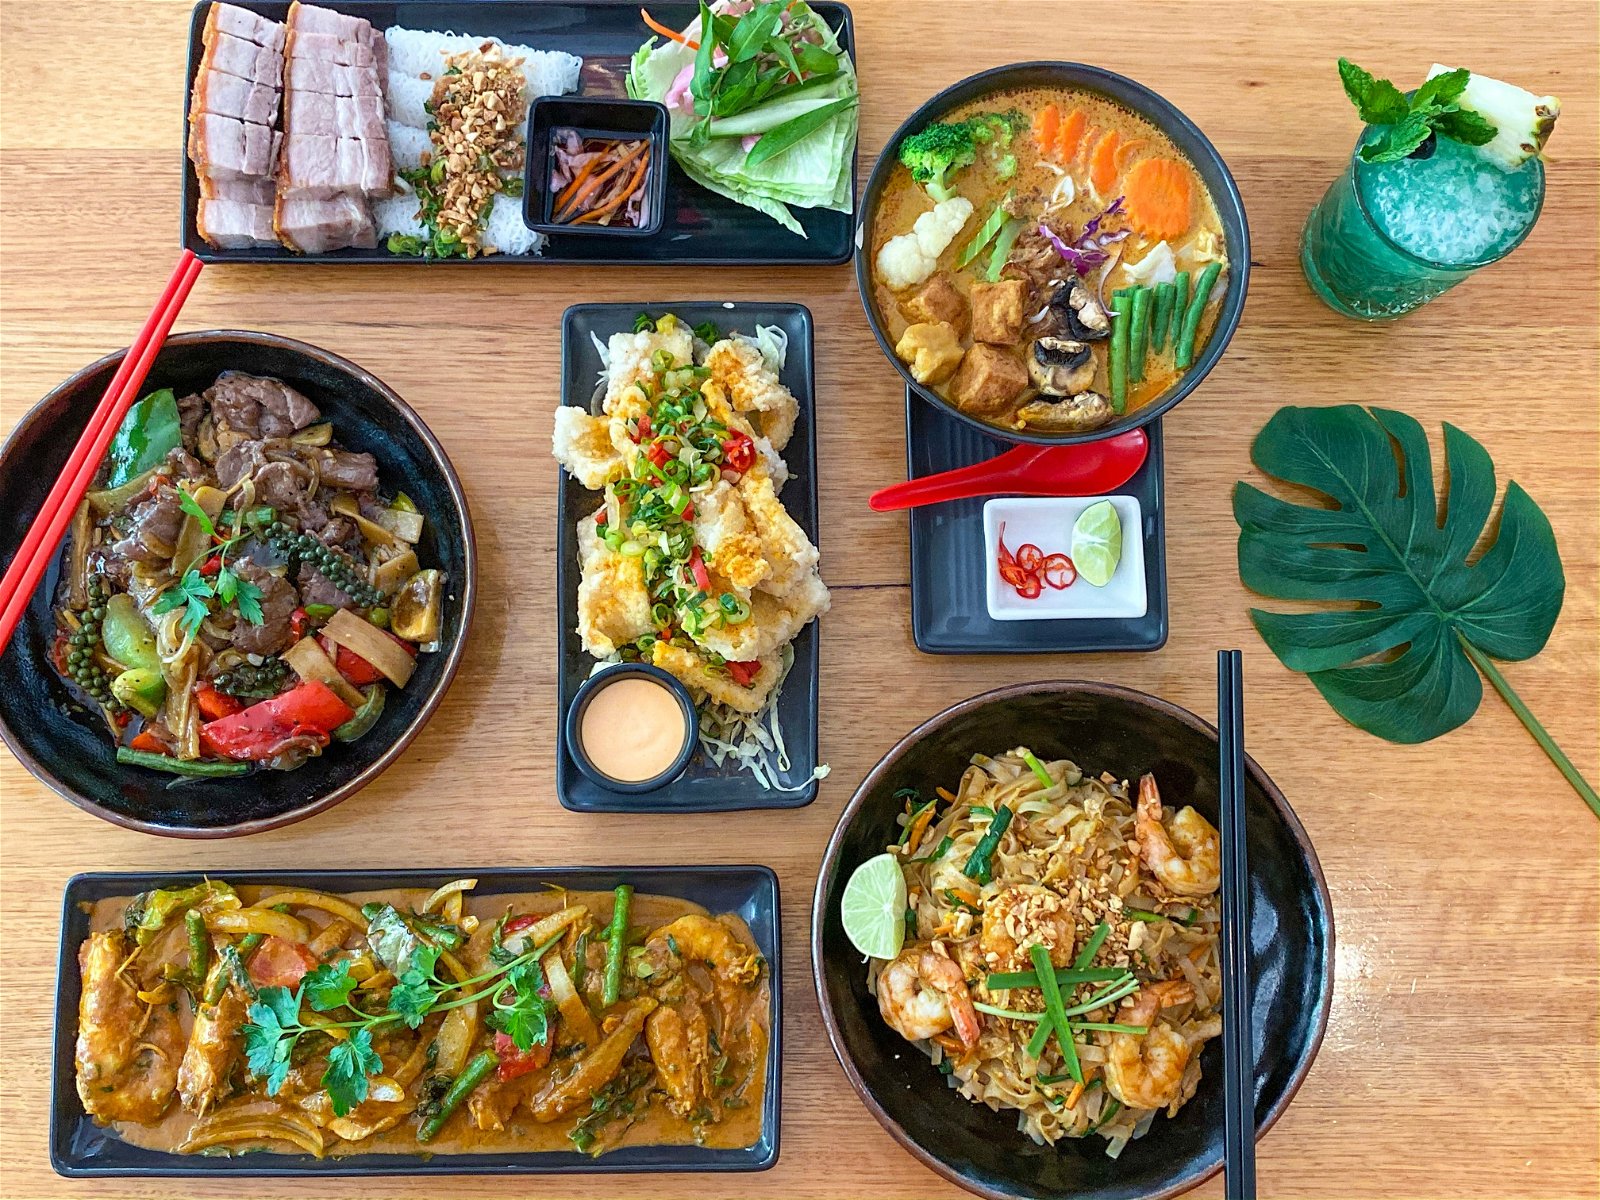 Chow A Taste of South East Asia - Food Delivery Shop